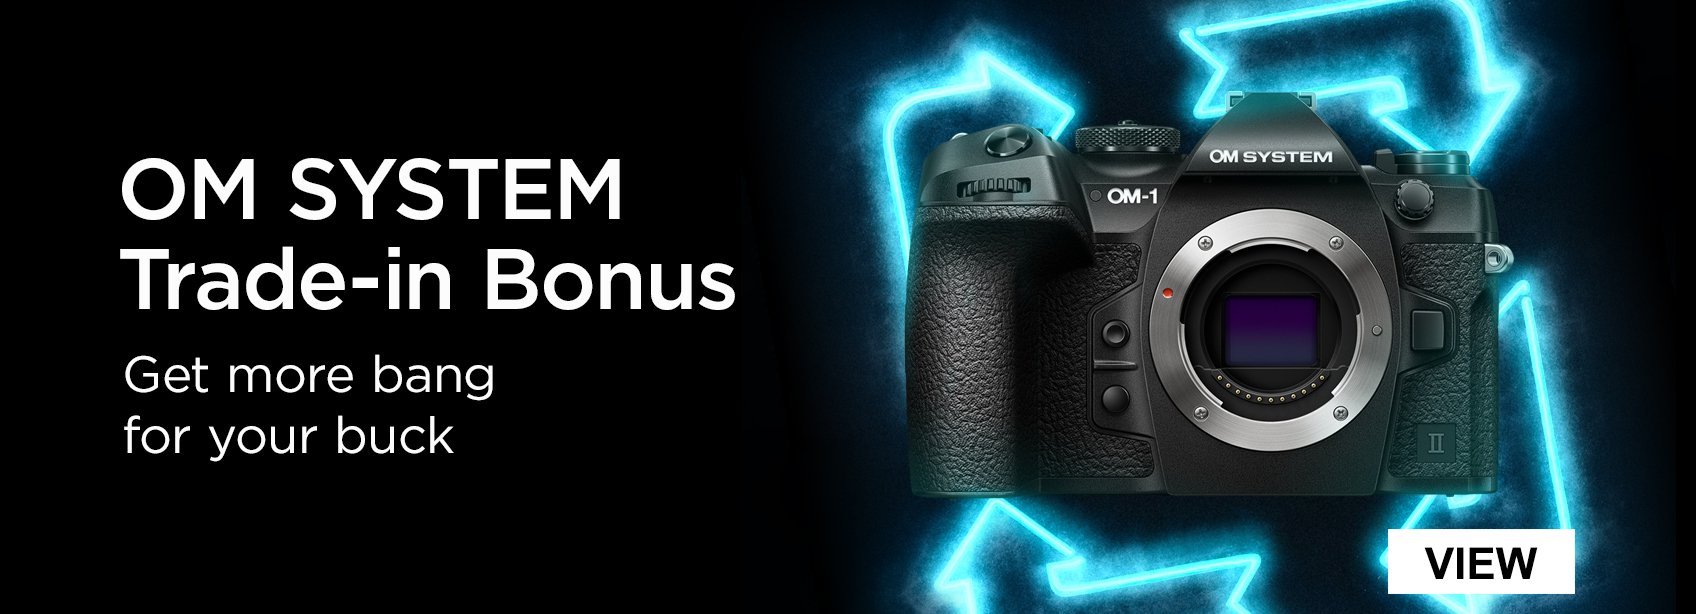 OM SYSTEM Trade-in Bonus Get more bang for your buck